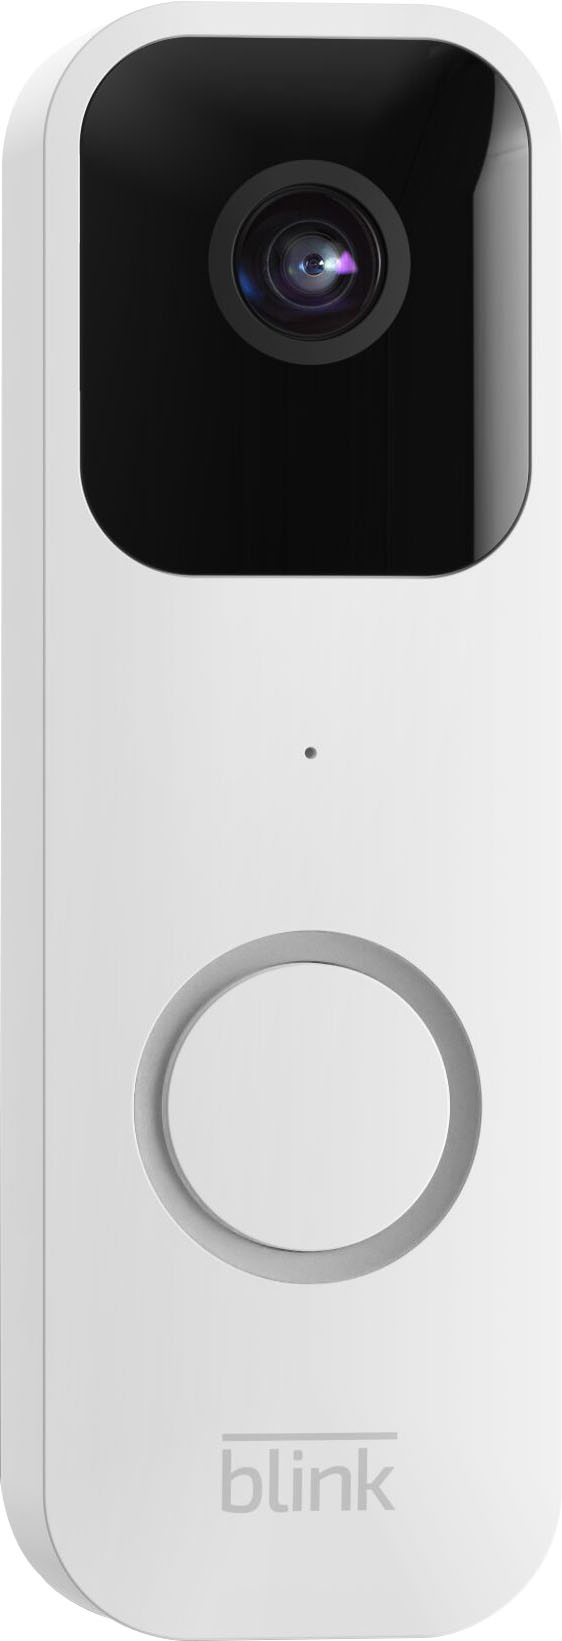 Left View: Blink - Smart Wifi Video Doorbell – Wired/Battery Operated - White